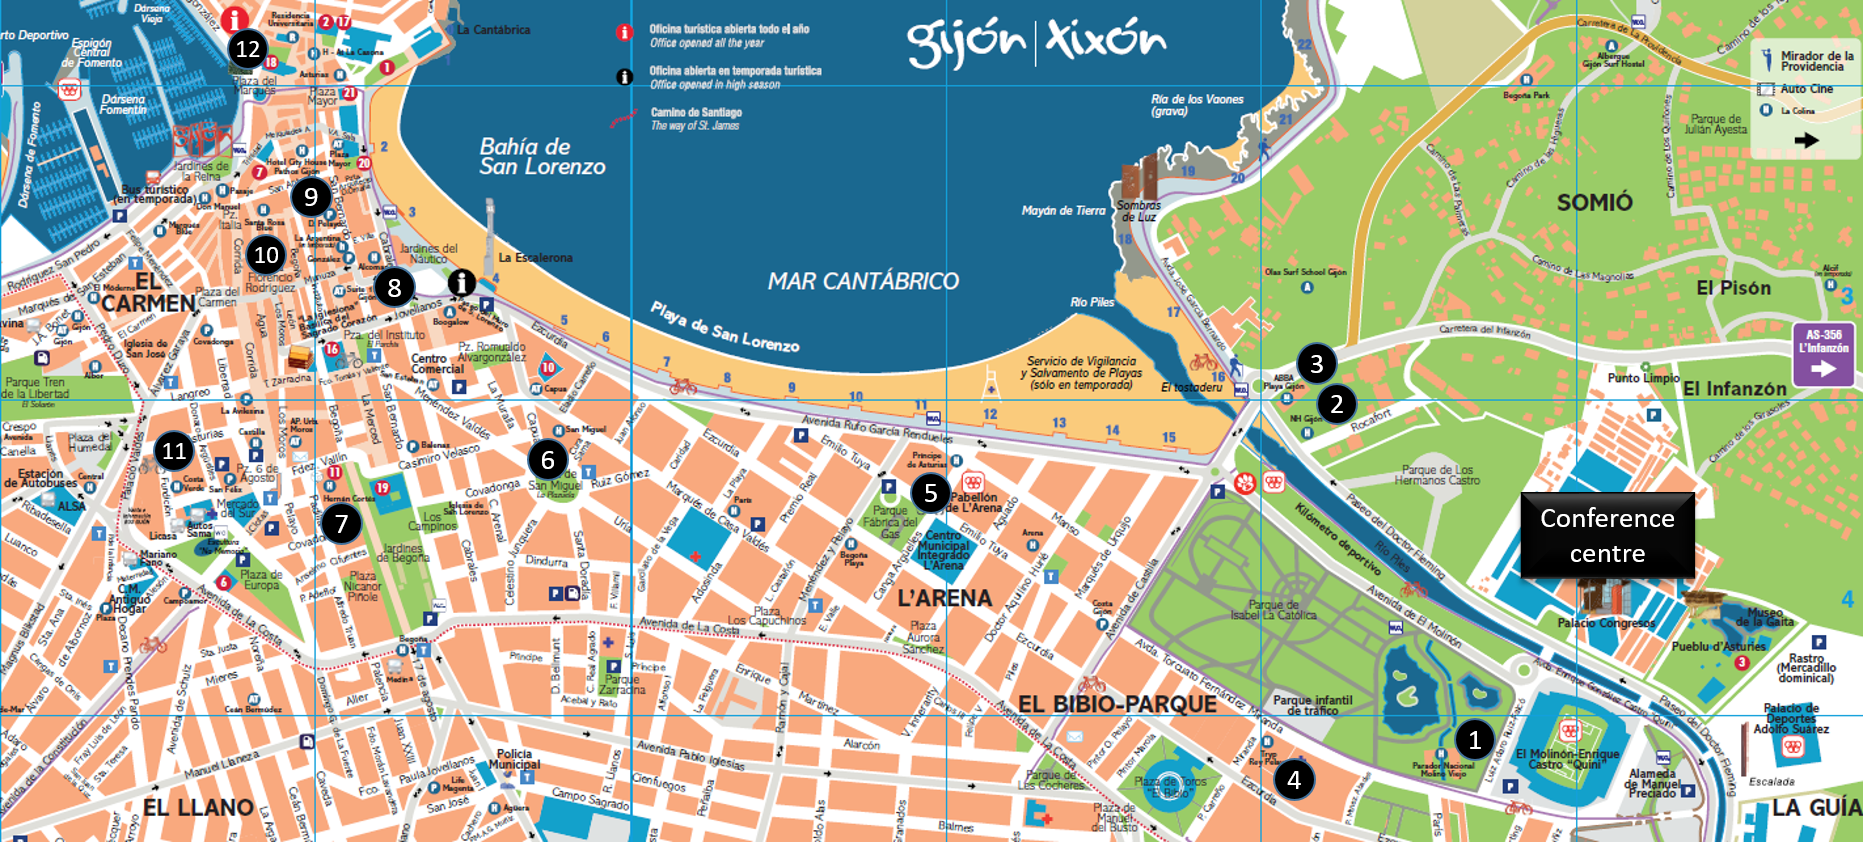 Gijon map with hotels